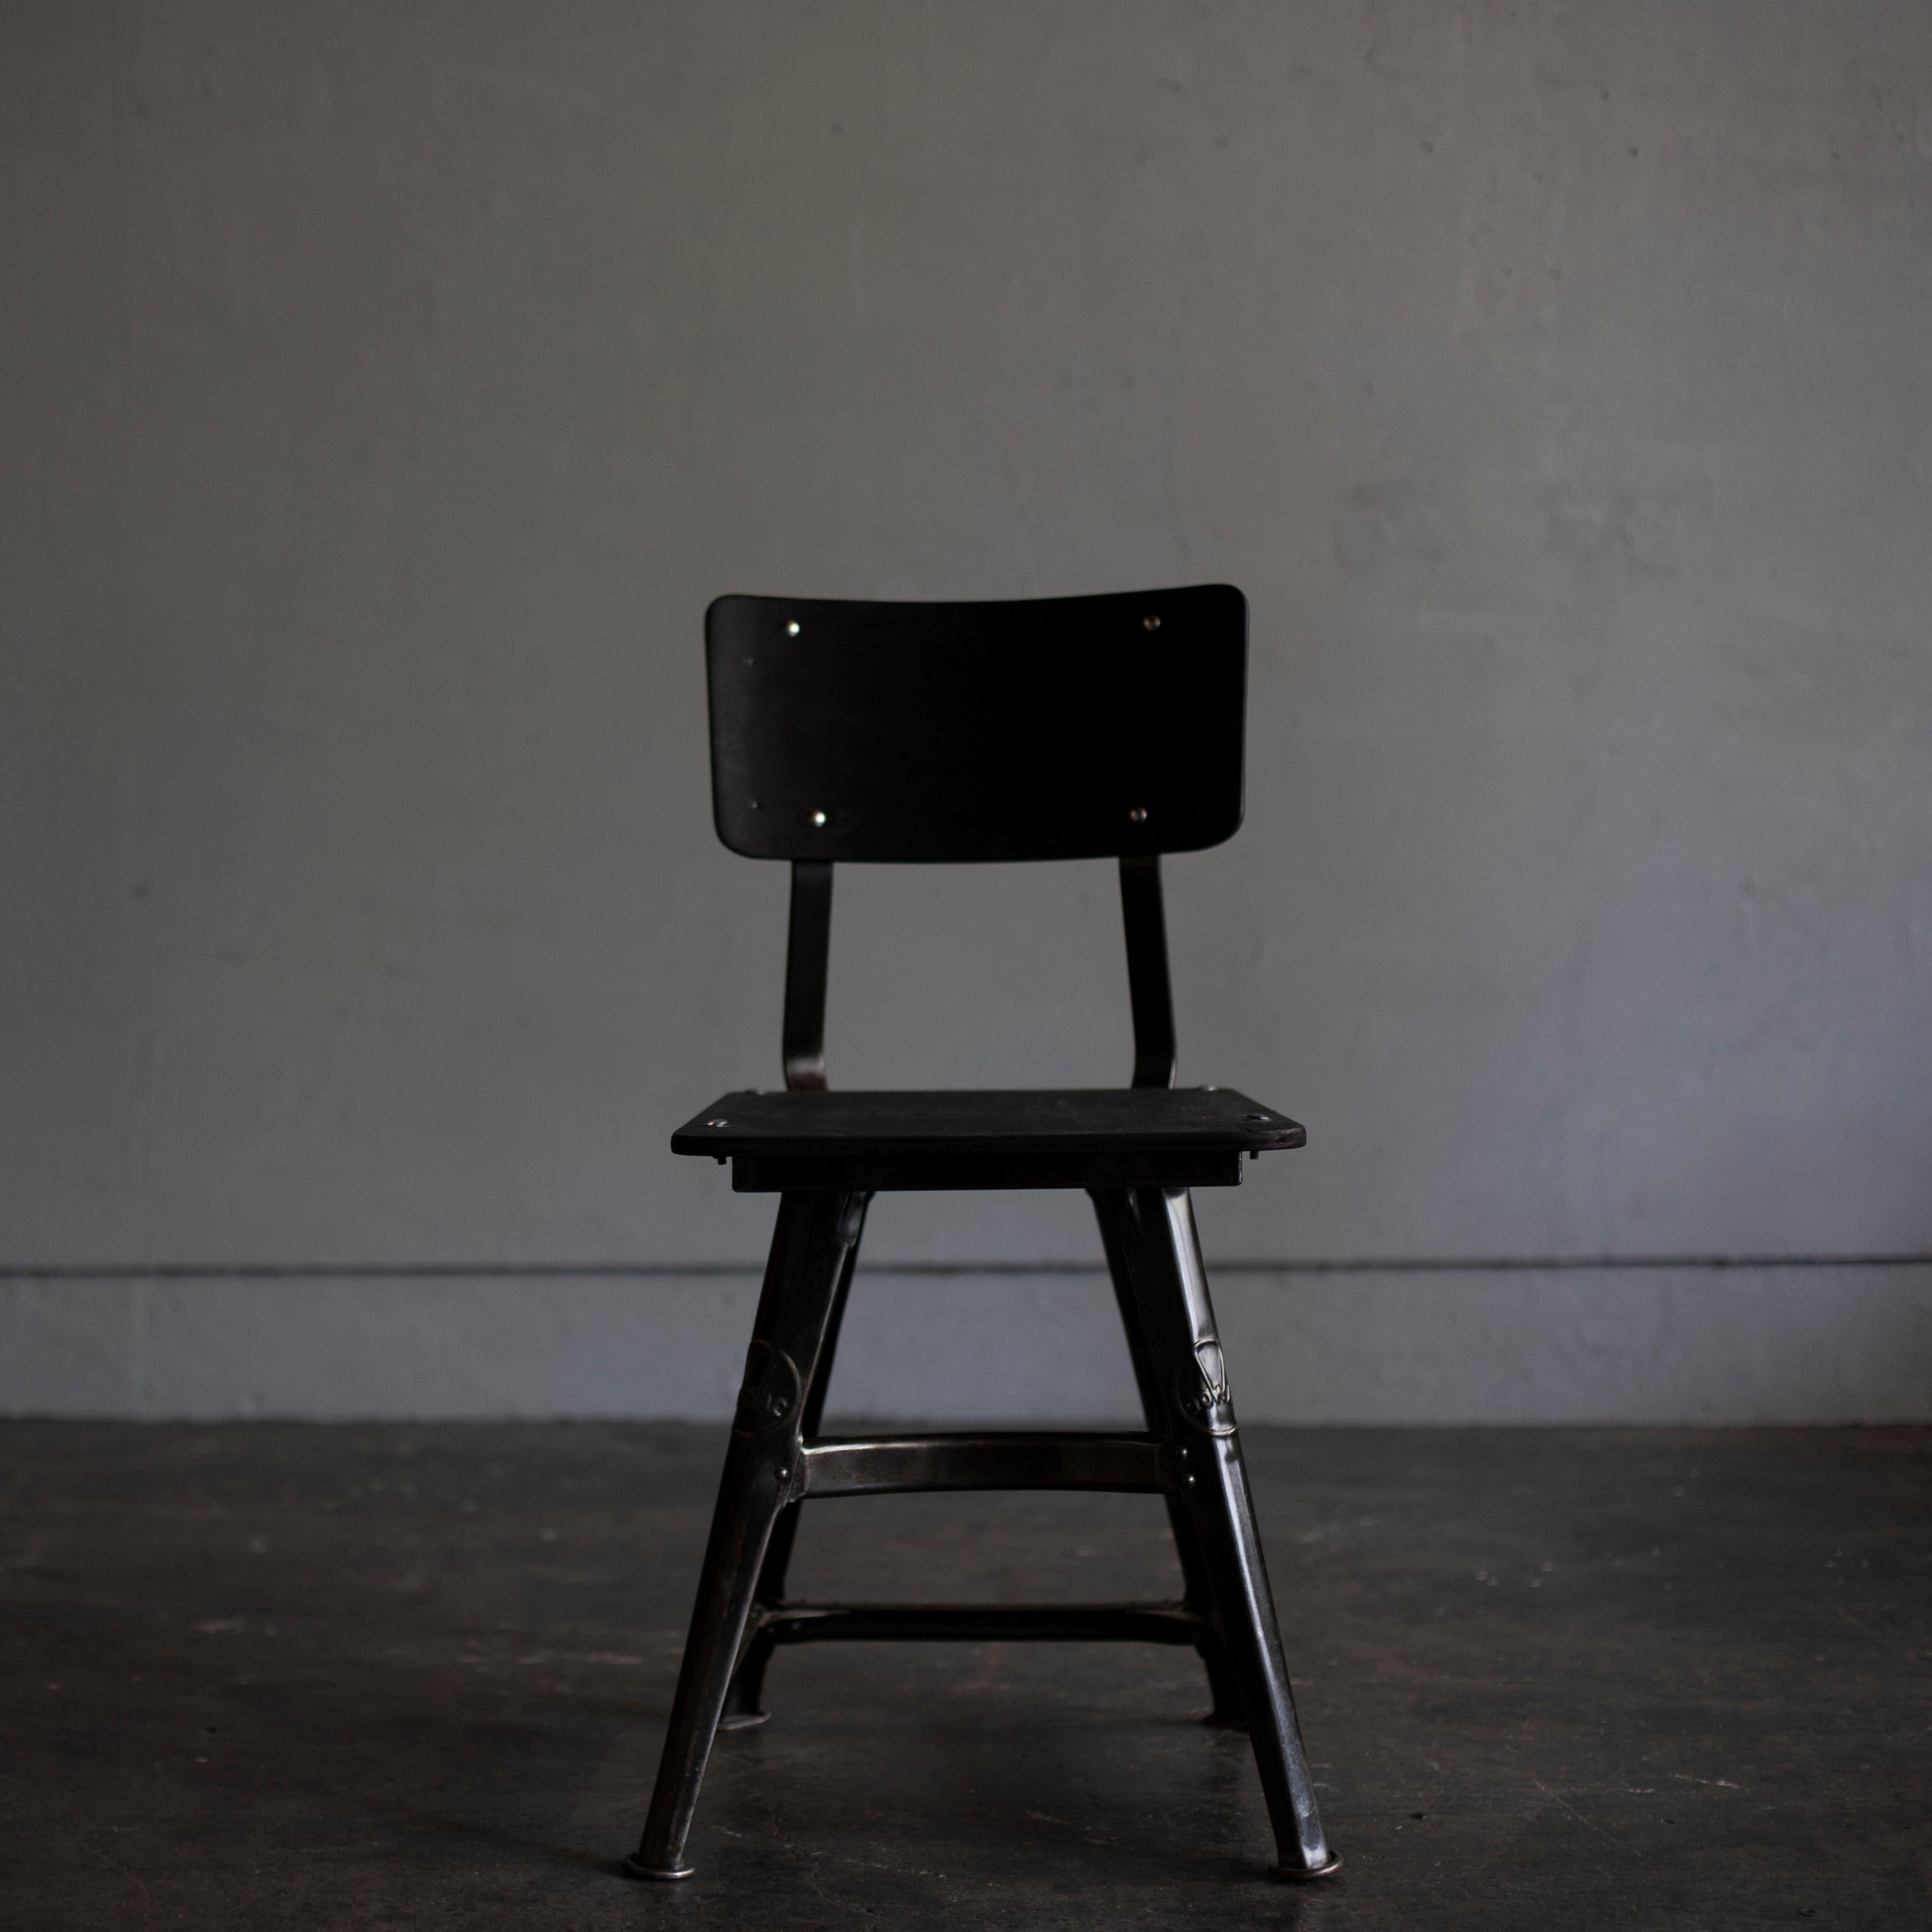 Rowac workshop chair, the model no. 11, in restored and repainted condition.
Wooden parts are not original made new and painted in black.